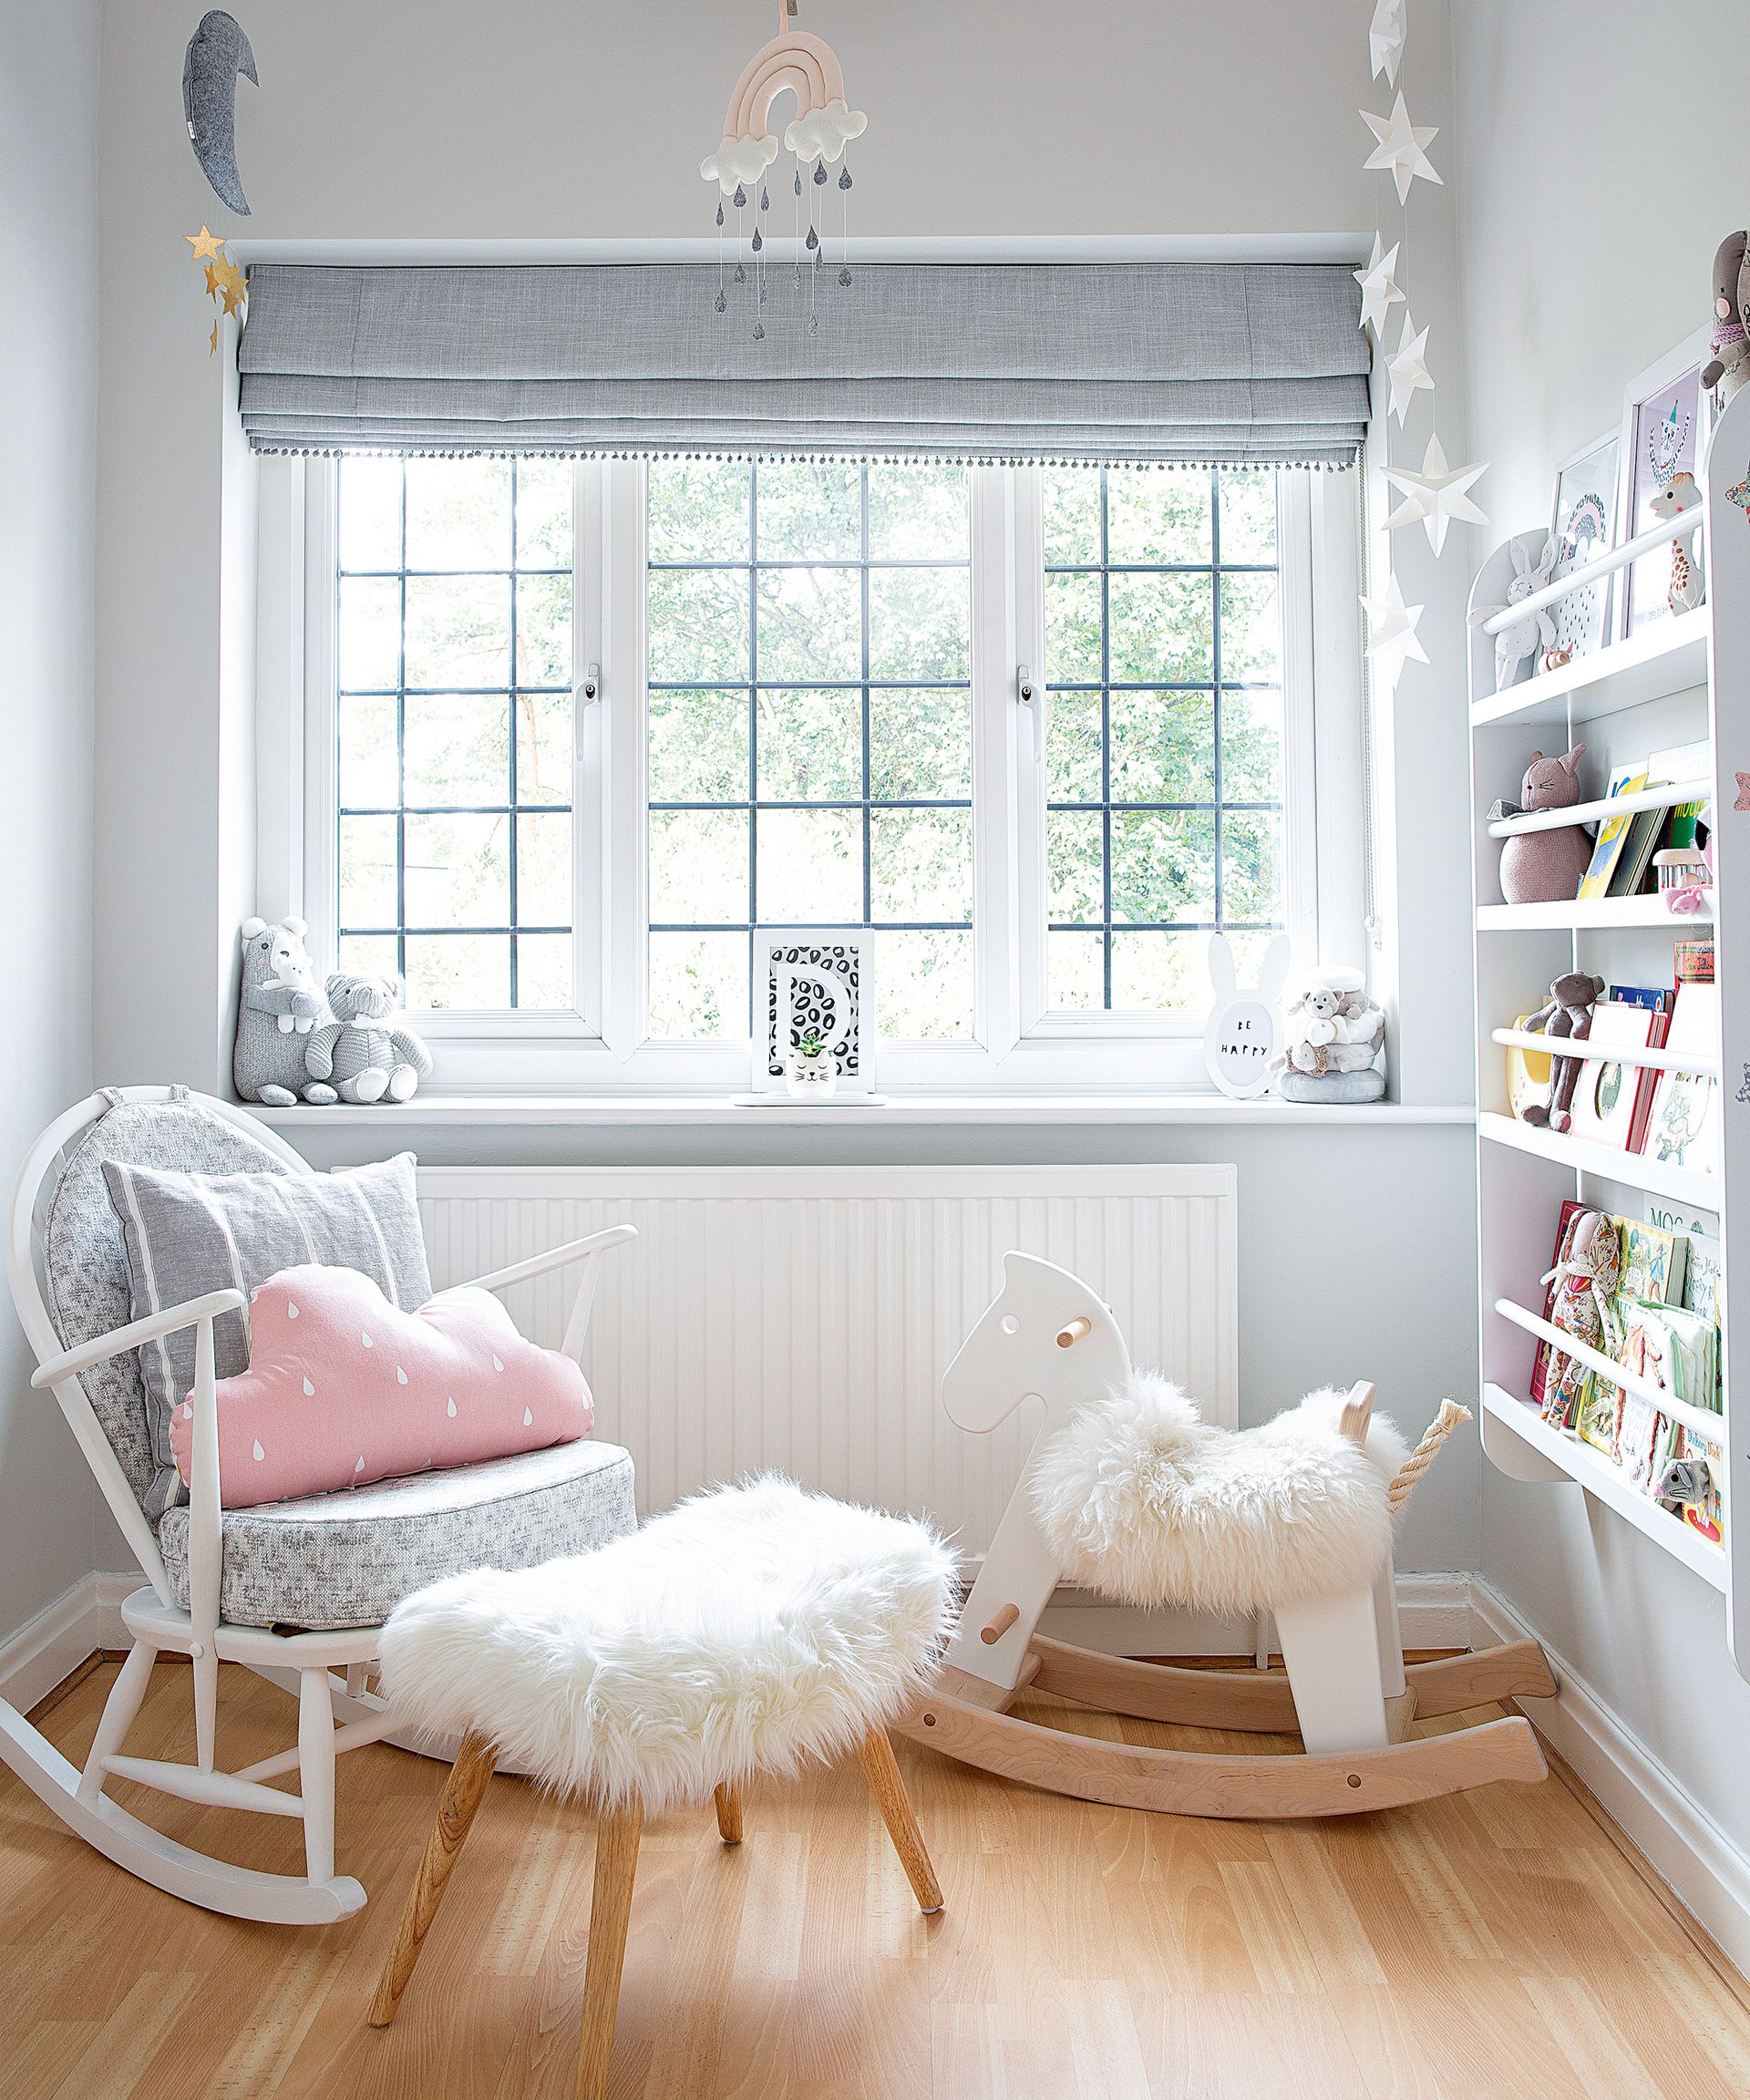 <p>                     Soft tones of gray work really well in nurseries. In this nursery, a pale gray on the walls is built upon with slightly darker shades in and among the textiles, and contrasted with crisp white in the room’s woodwork.                   </p>                                      <p>                     Pink works especially well as an accent color as it adds warmth, while gray acts as a great base color for baby boy's nursery too.                   </p>